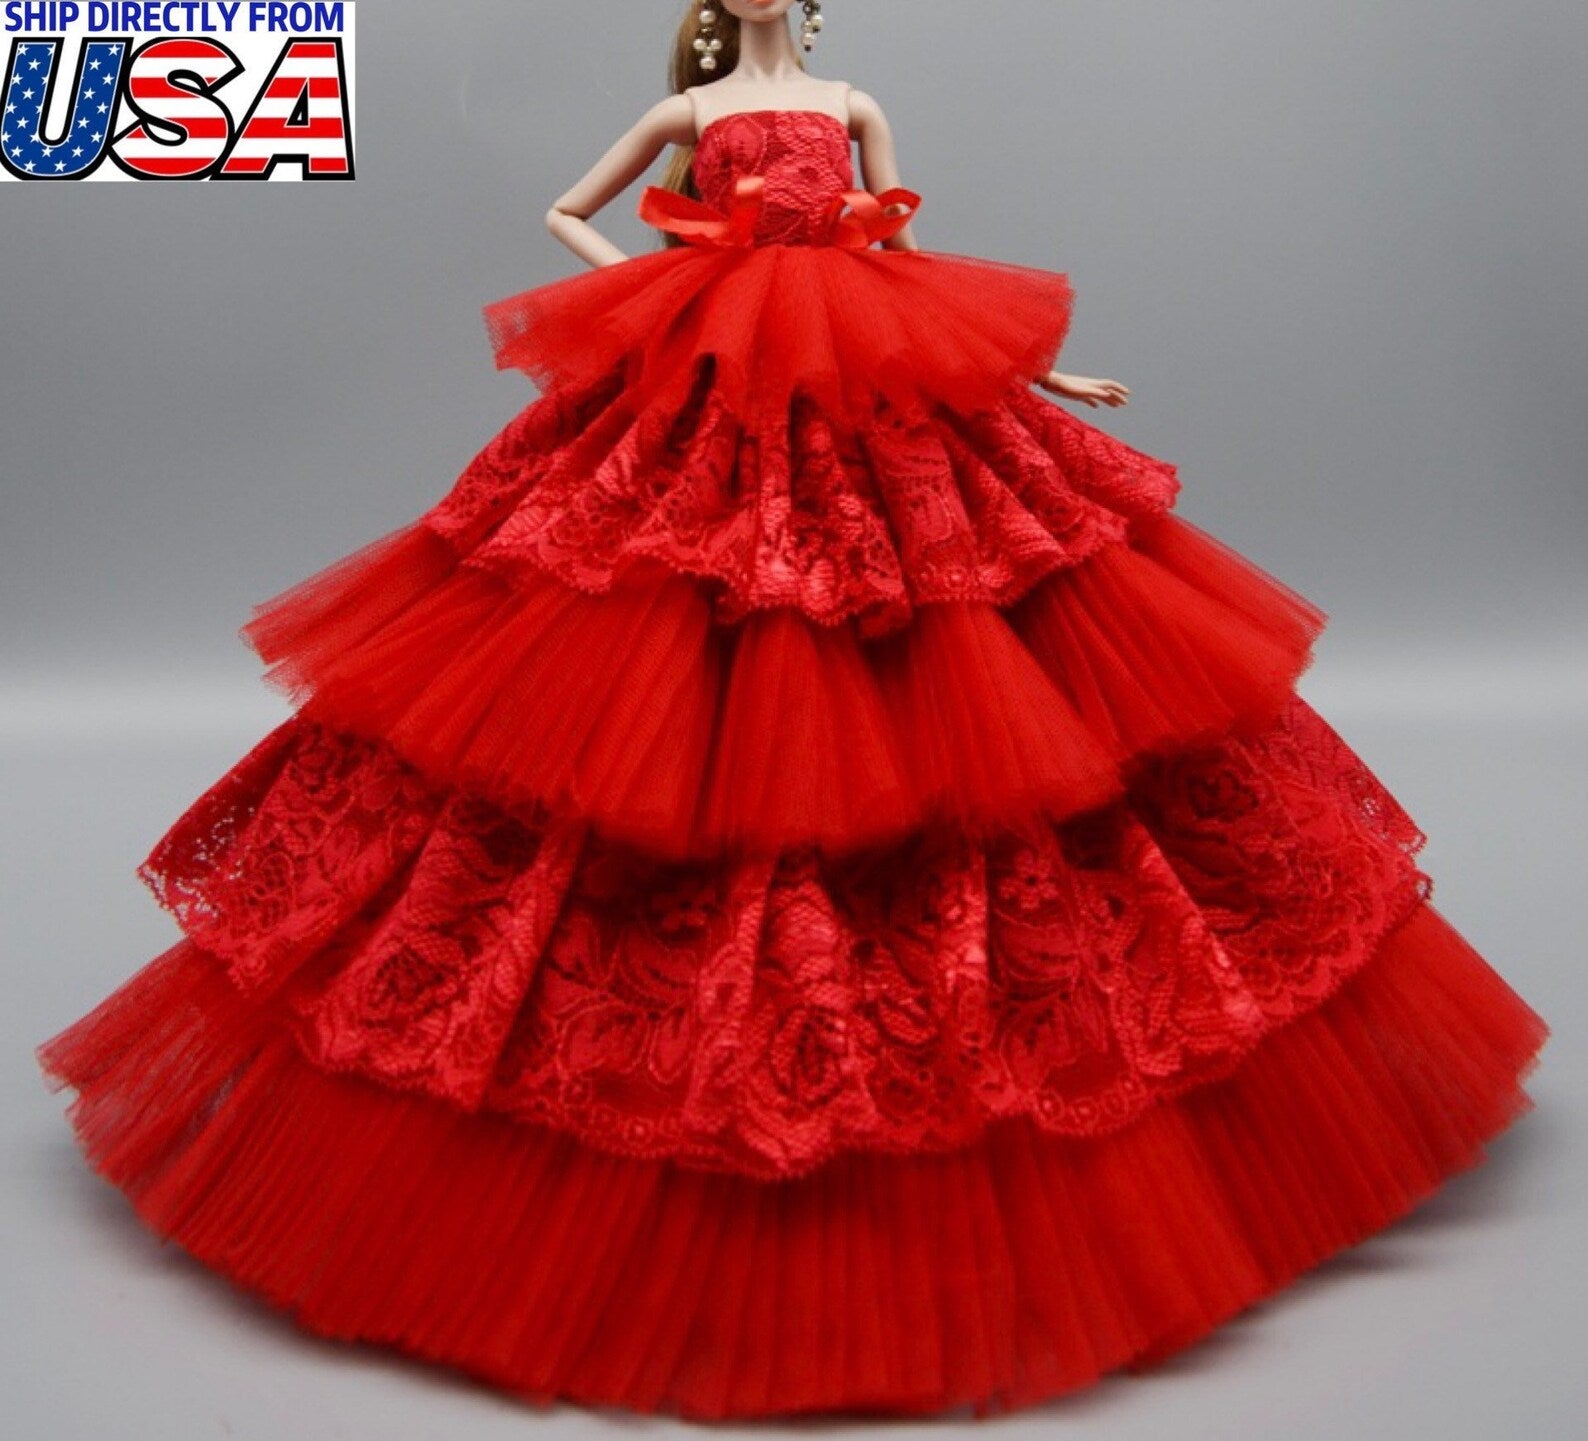 NEW Red Wedding Dress for 11.5inch Fashion Doll Princess Long Evening Dresses Doll Clothes 1/6 Toy HIGH QUALITY !